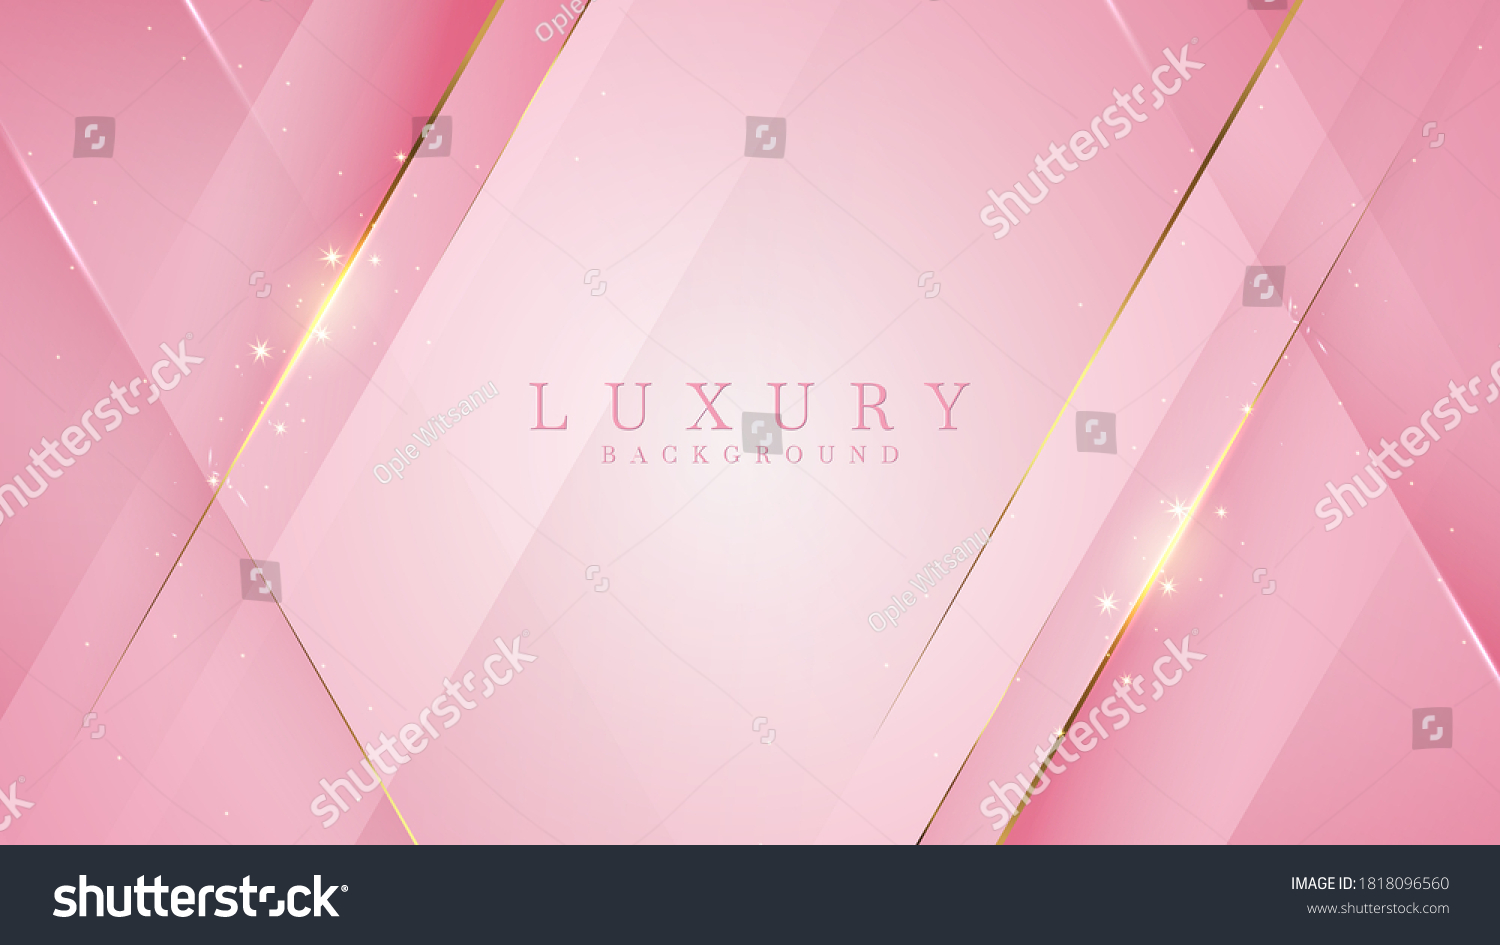 Luxury golden line background pink shades in 3d abstract style. Illustration from vector about modern template deluxe design. #1818096560